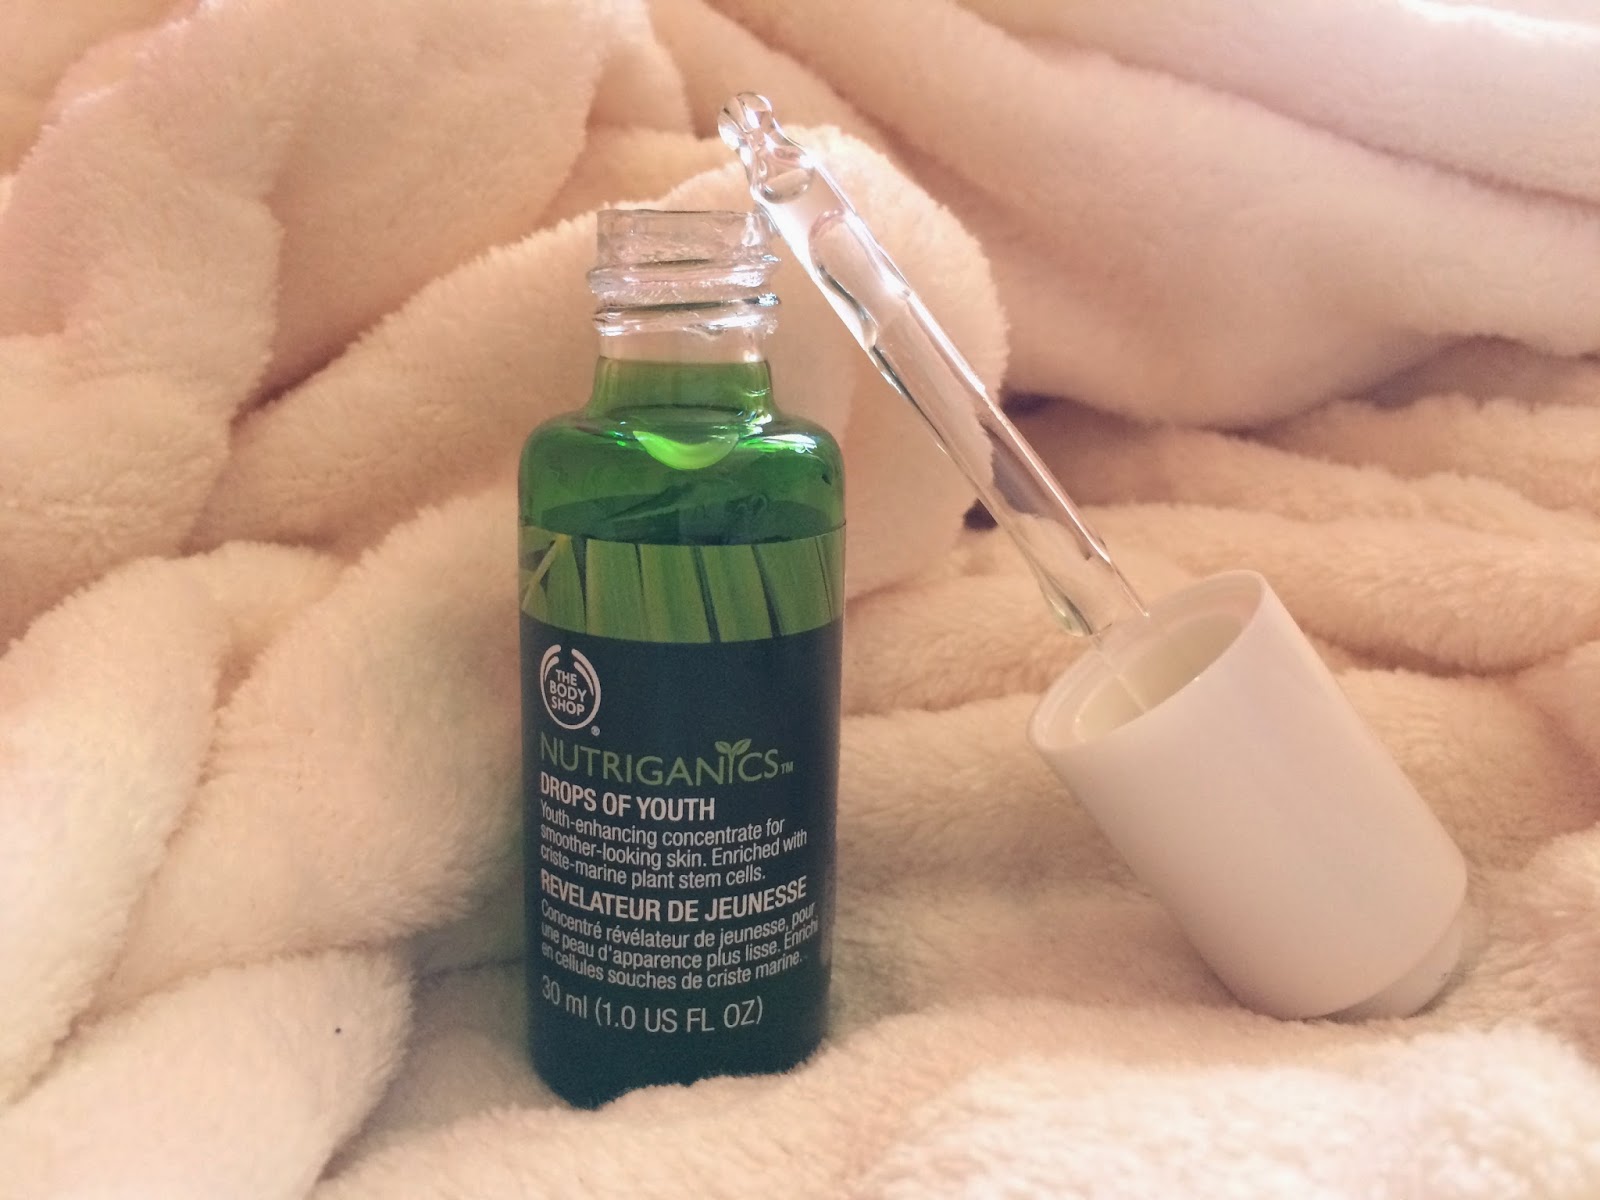 nutriganics drops of youth by the body shop review bubblybeauty135